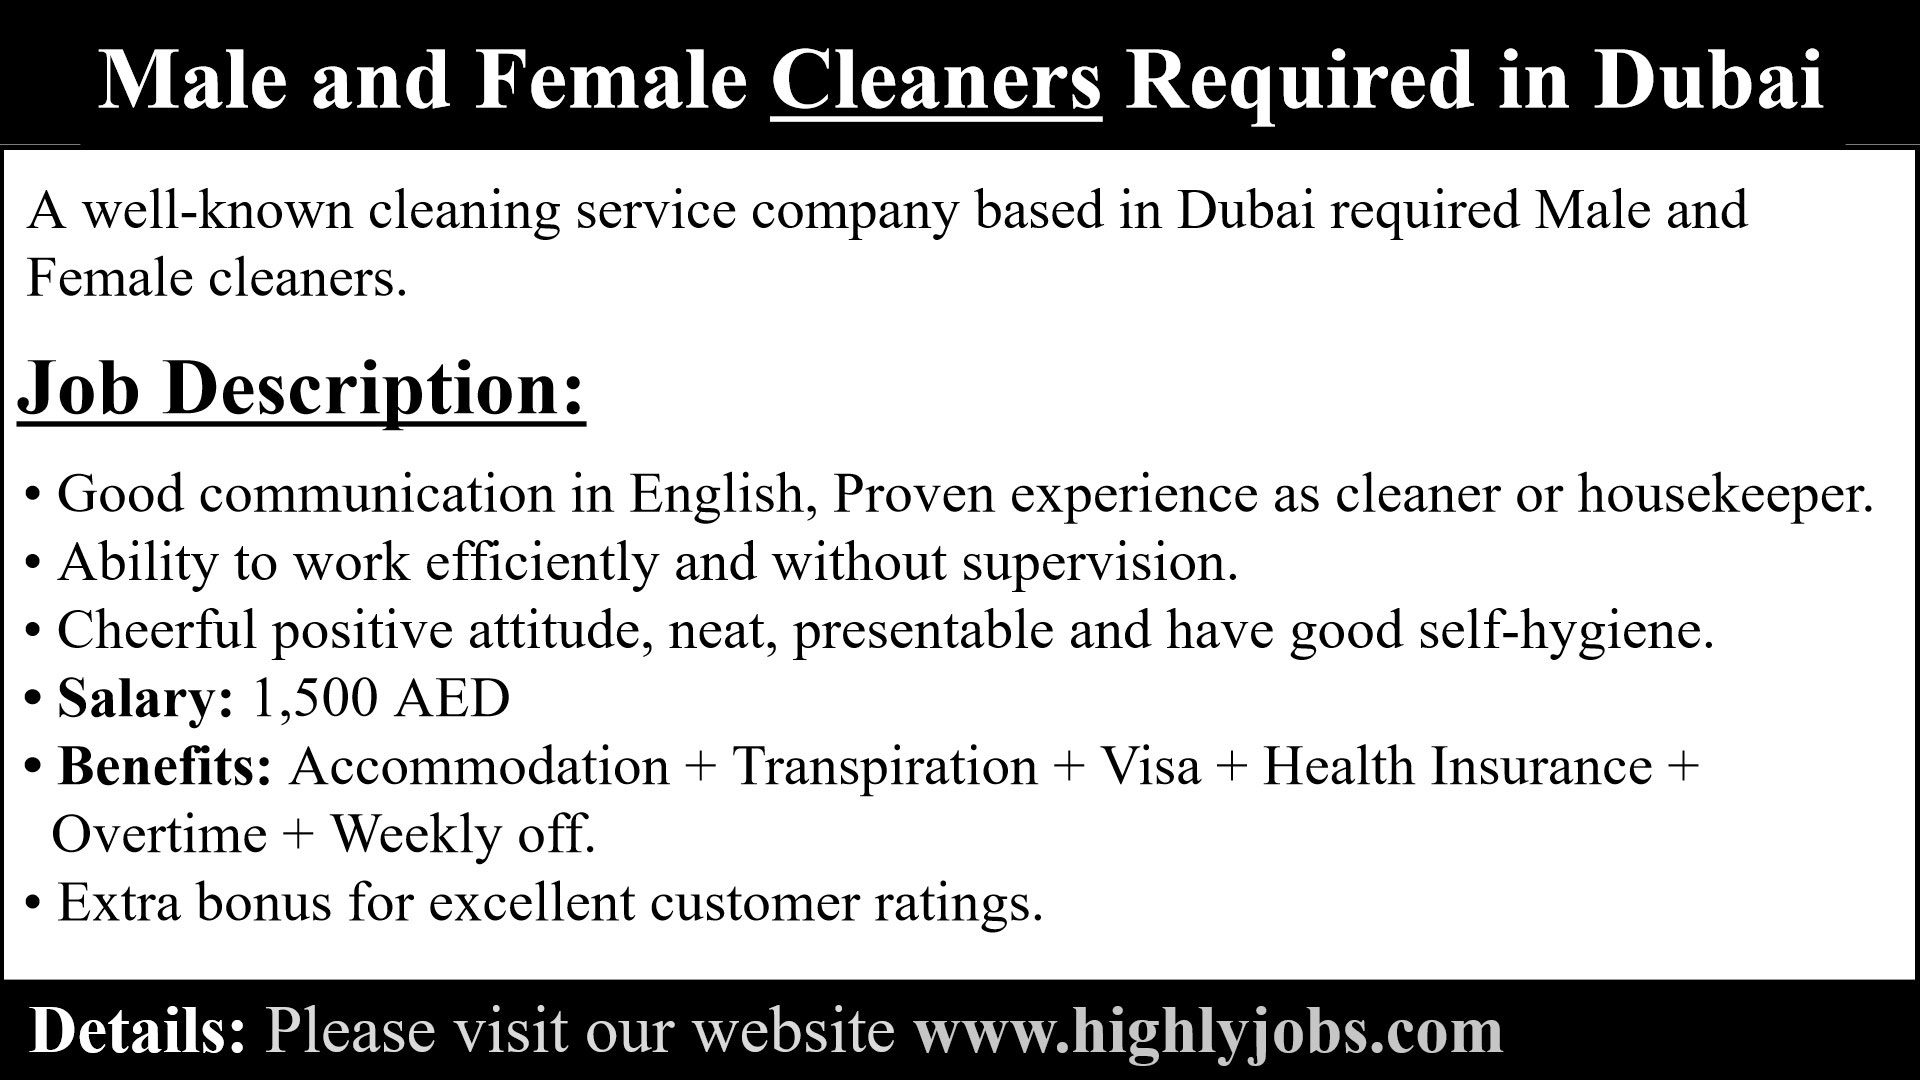 Male and Female Cleaners Required in Dubai